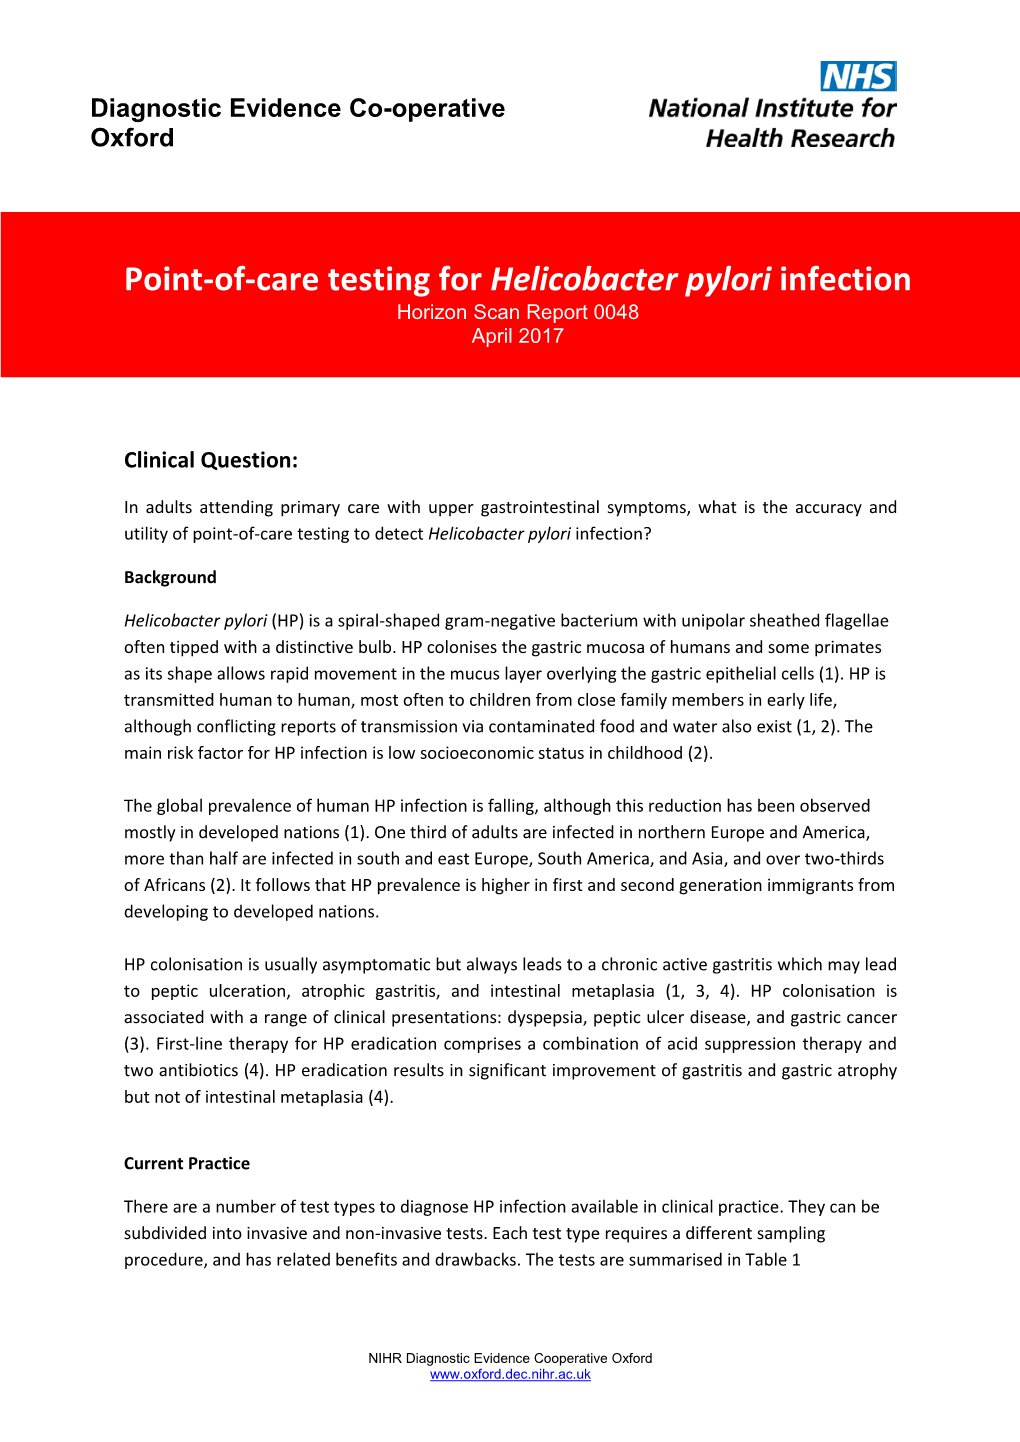 Point-Of-Care Testing for Helicobacter Pylori Infection